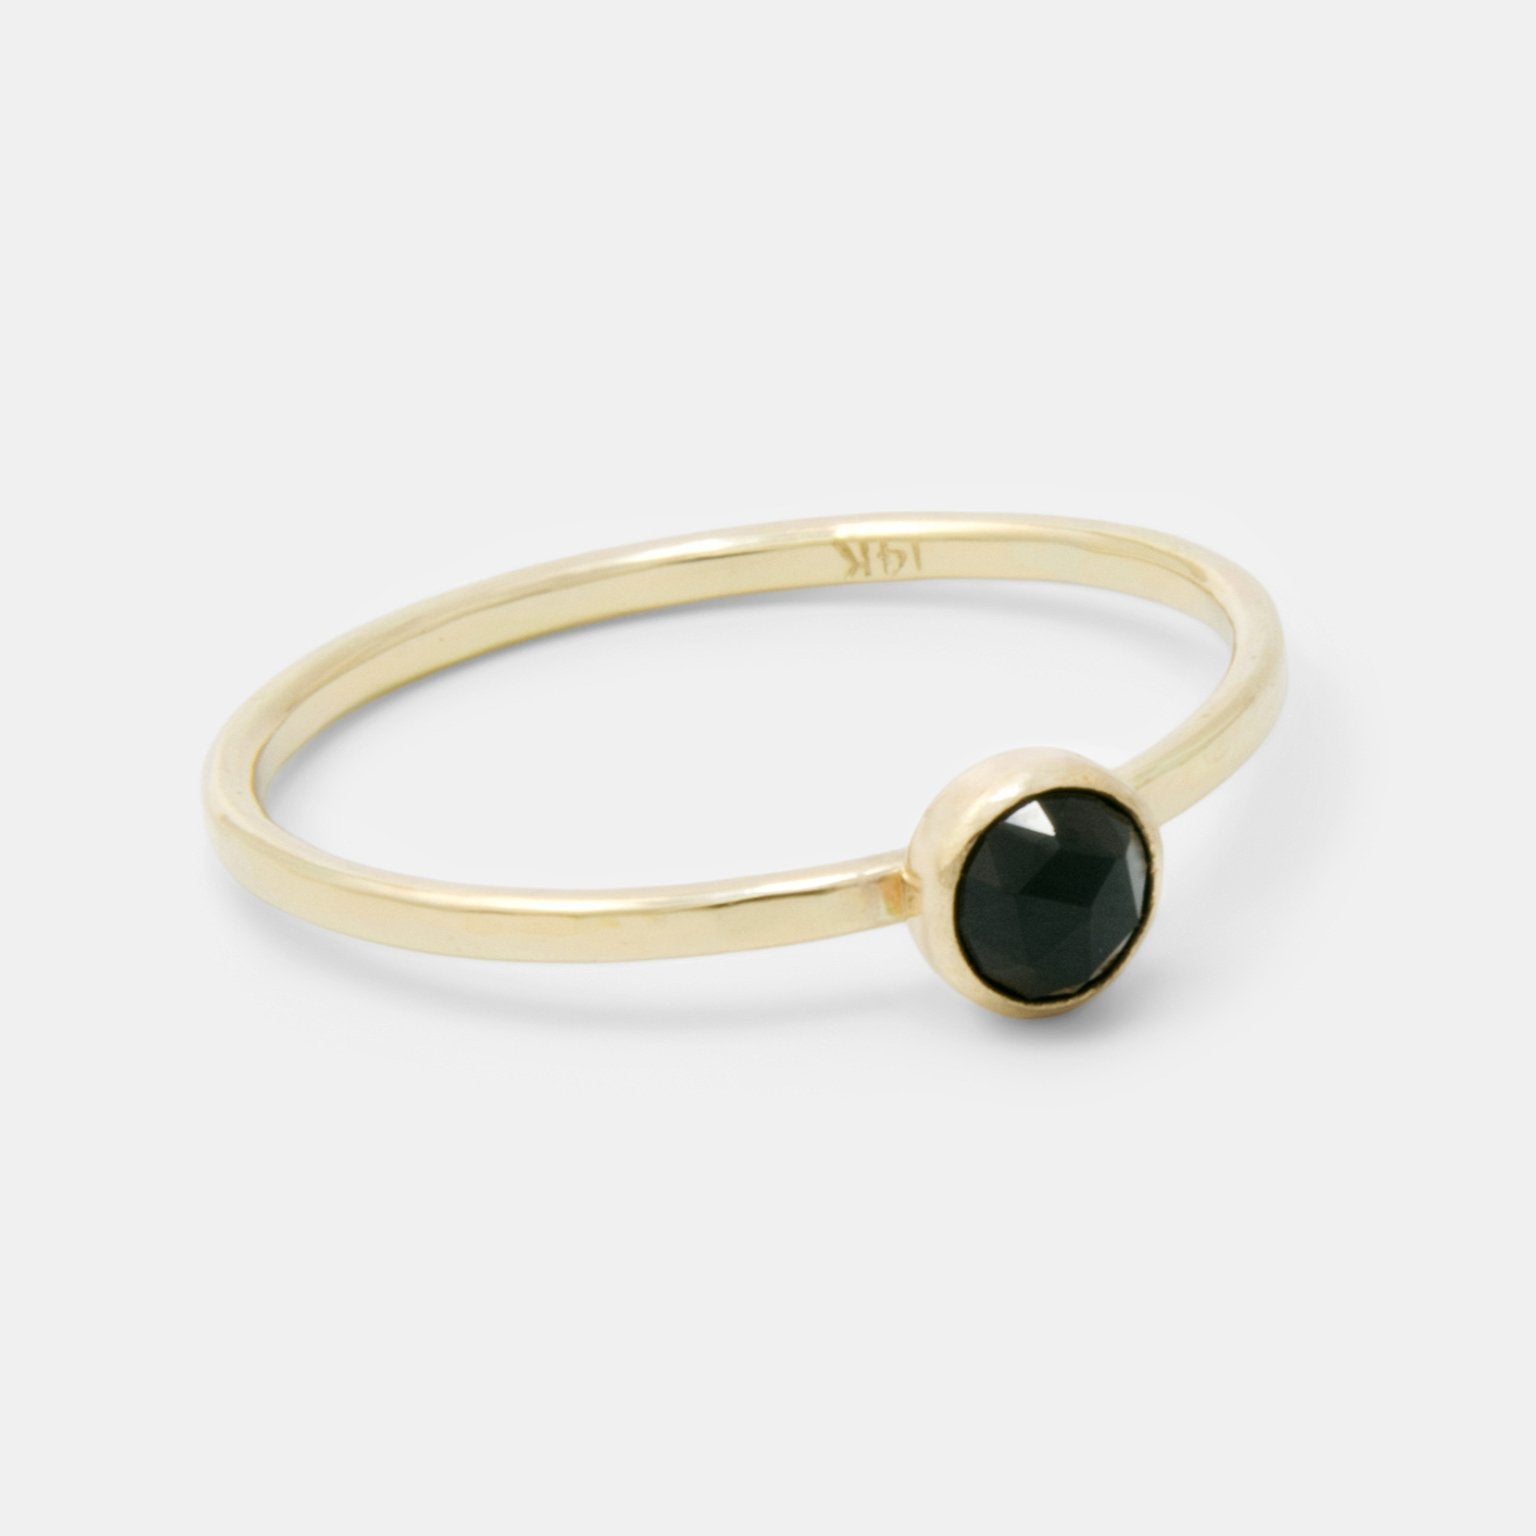 Black spinel & solid gold stacking ring - Simone Walsh Jewellery Australia